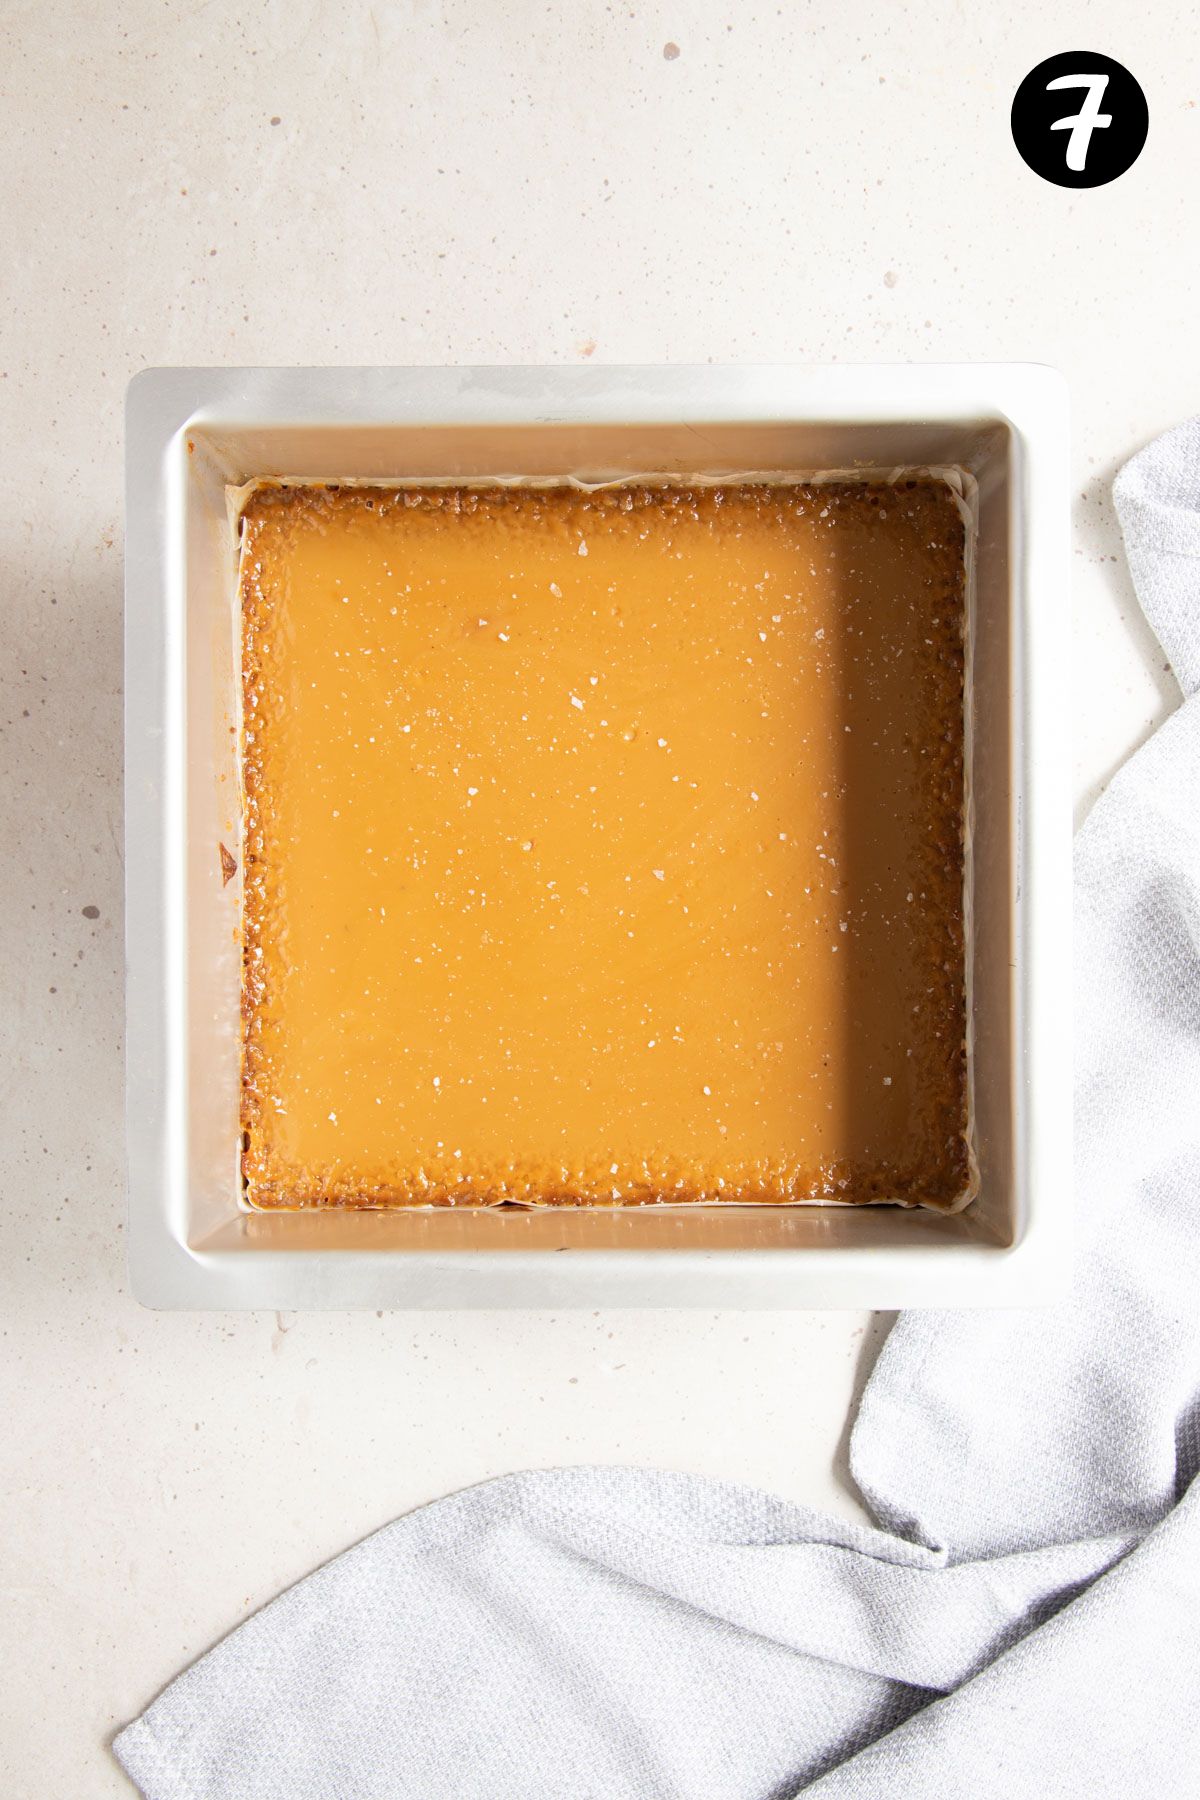 a square baking tin filled with a caramel topping, sprinkled with salt flakes.